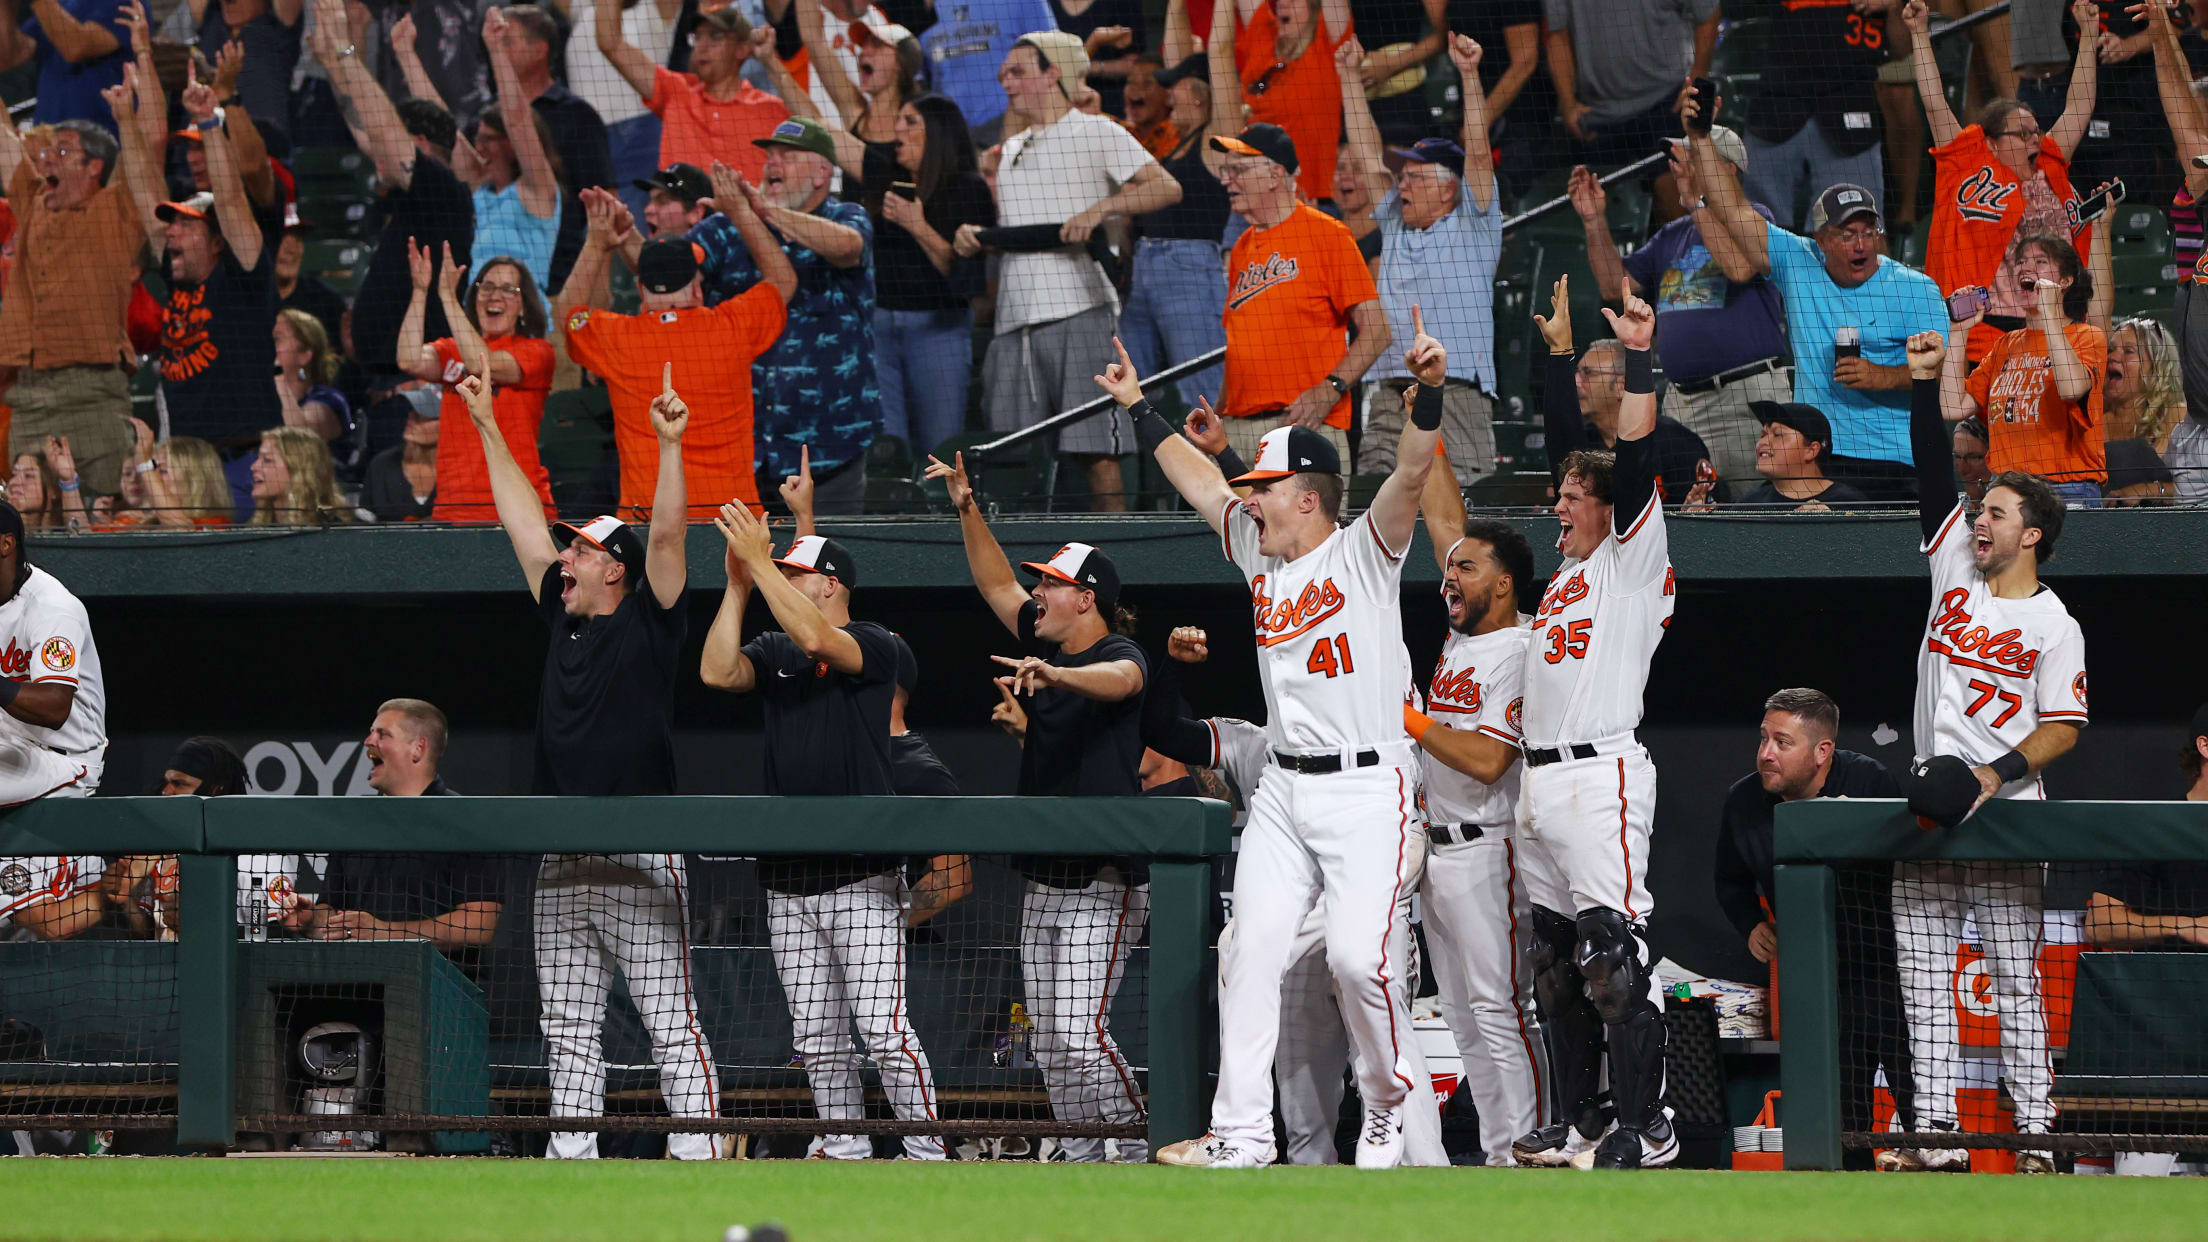 The 2022 Orioles have done plenty, but is it enough? - Blog